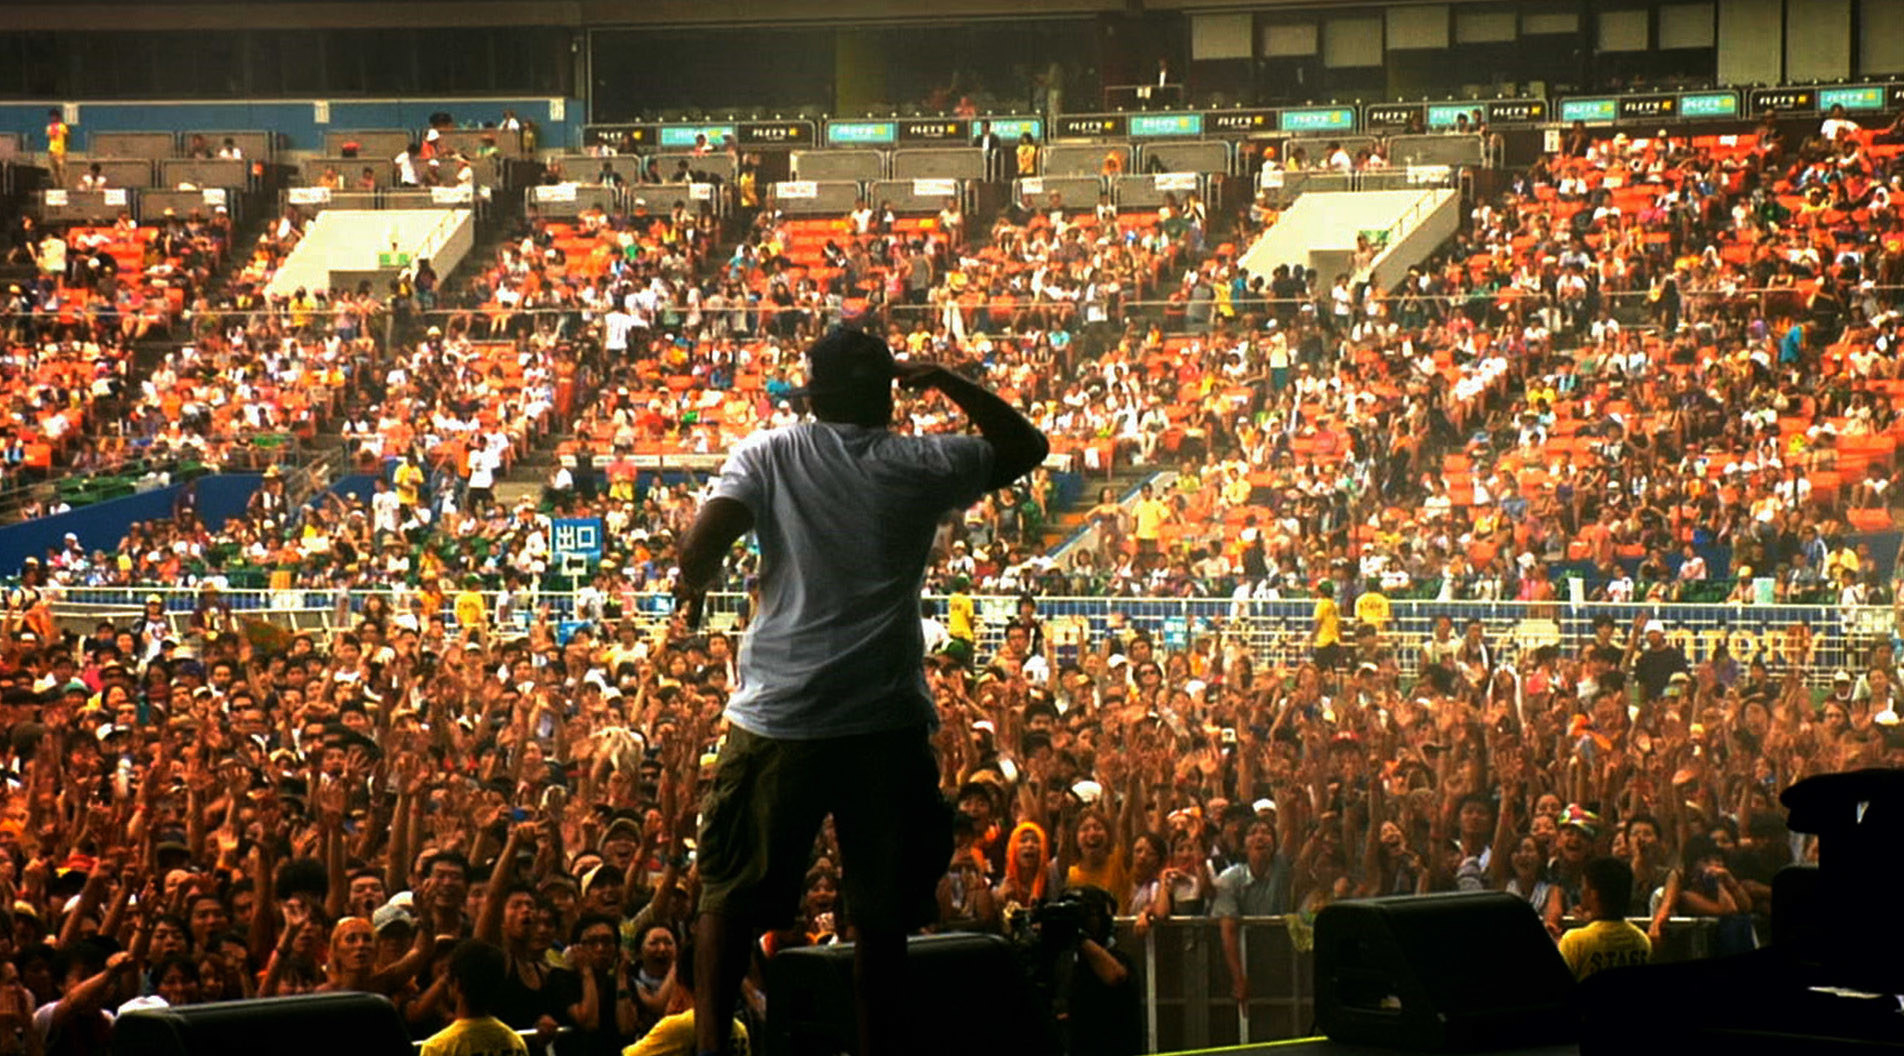 Q-Tip performing in front of a crowd.